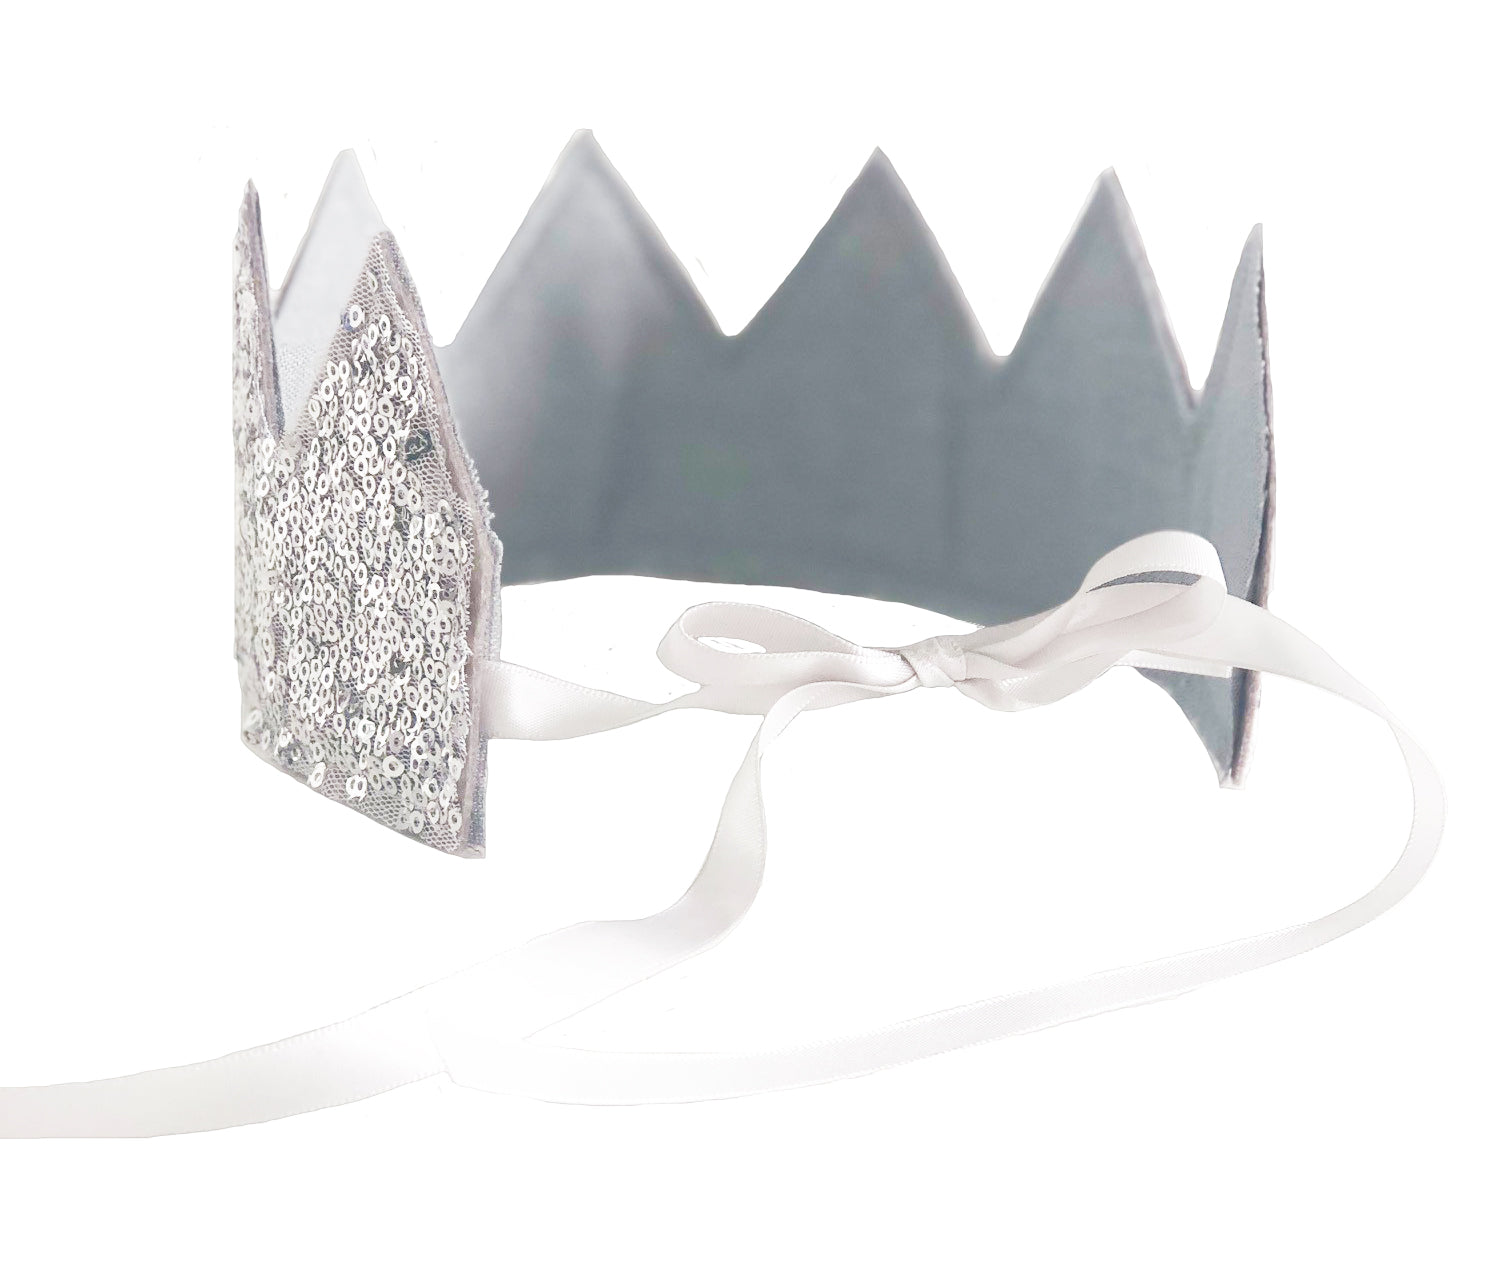 A little sparkle goes a long way with this gorgeous sequin crown. Ribbon closure for adjustable wear.  Suitable 18 months - 4 yrs approx.